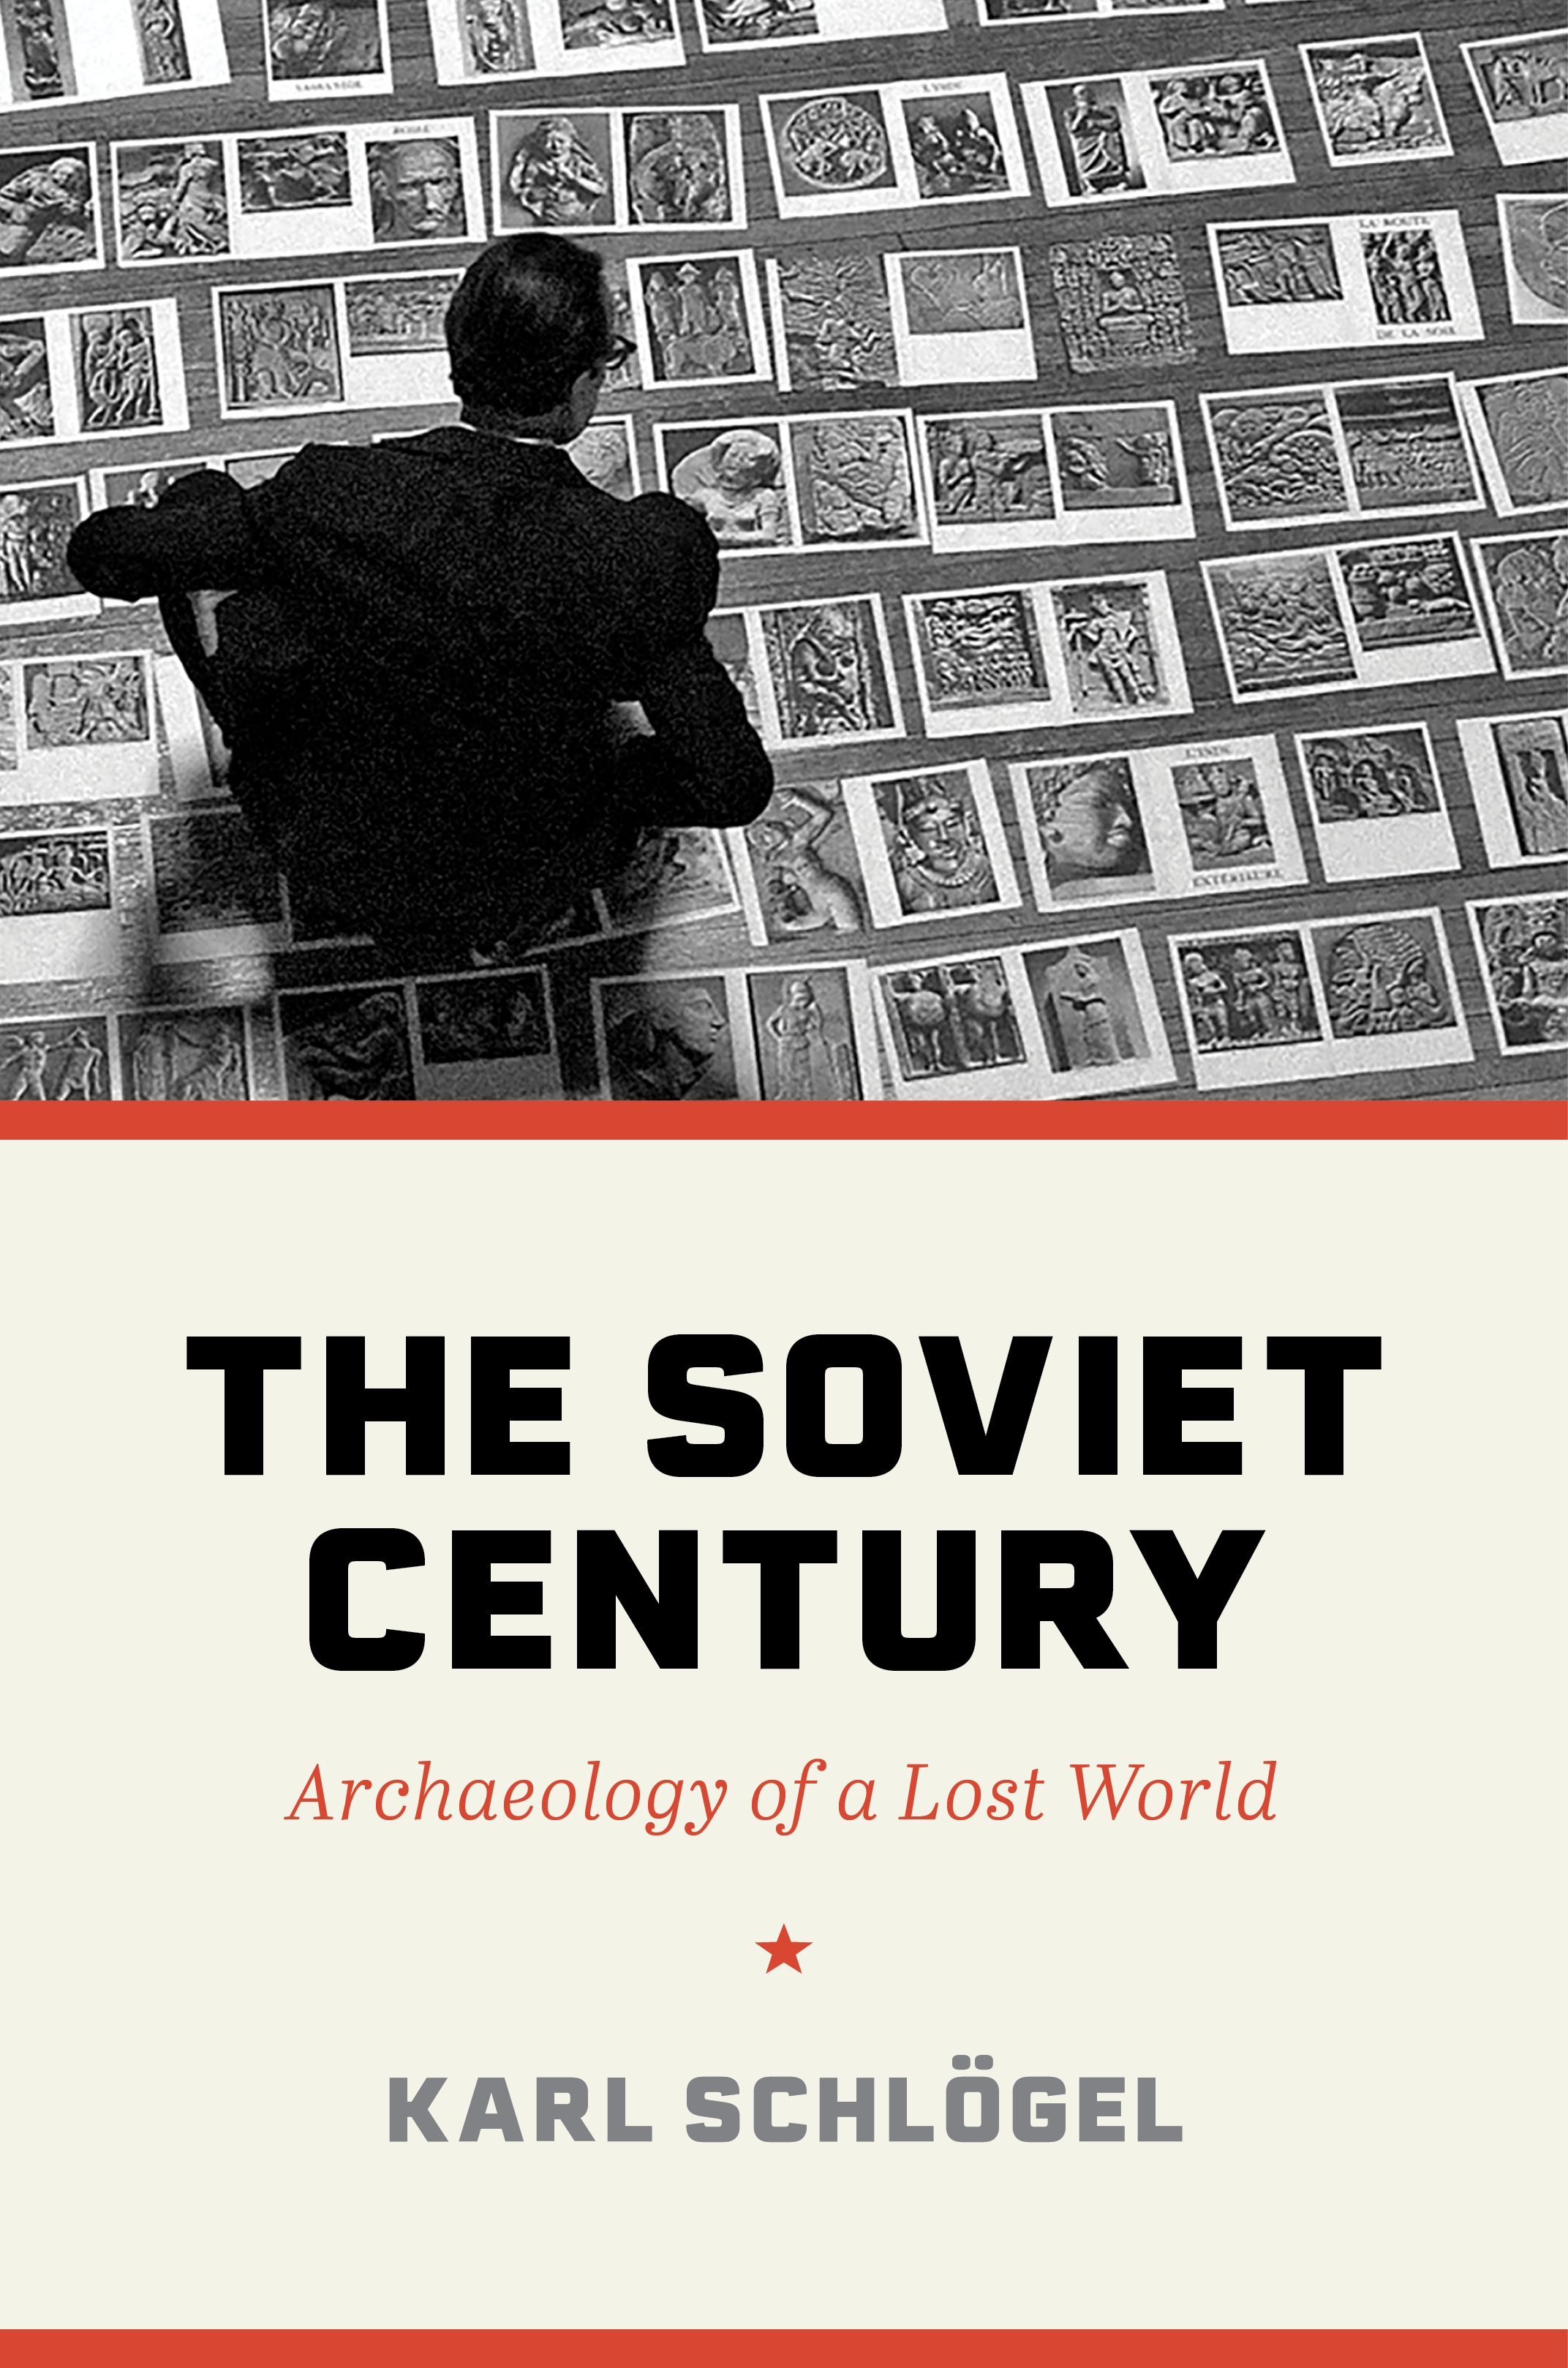 An intellectual history of the Cold War era